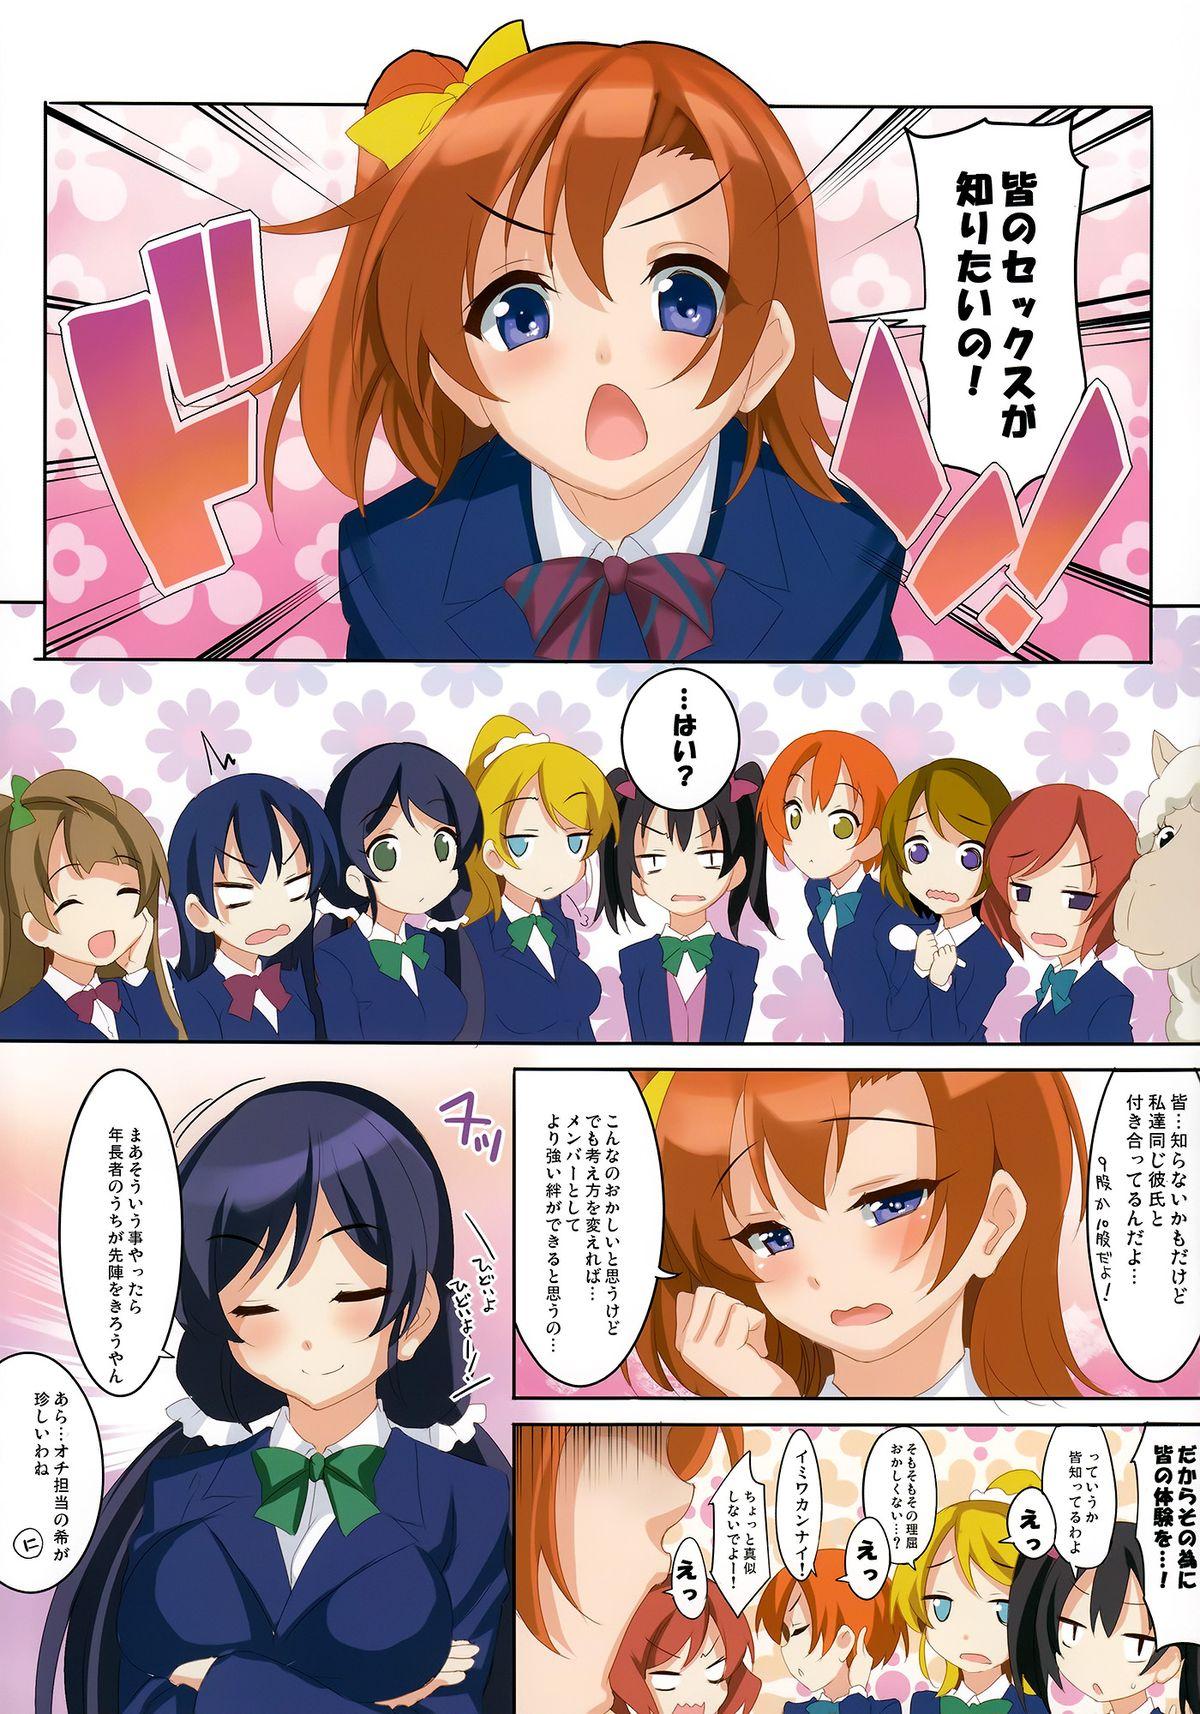 Curves CL-orz 41 - Love live Long - Page 3